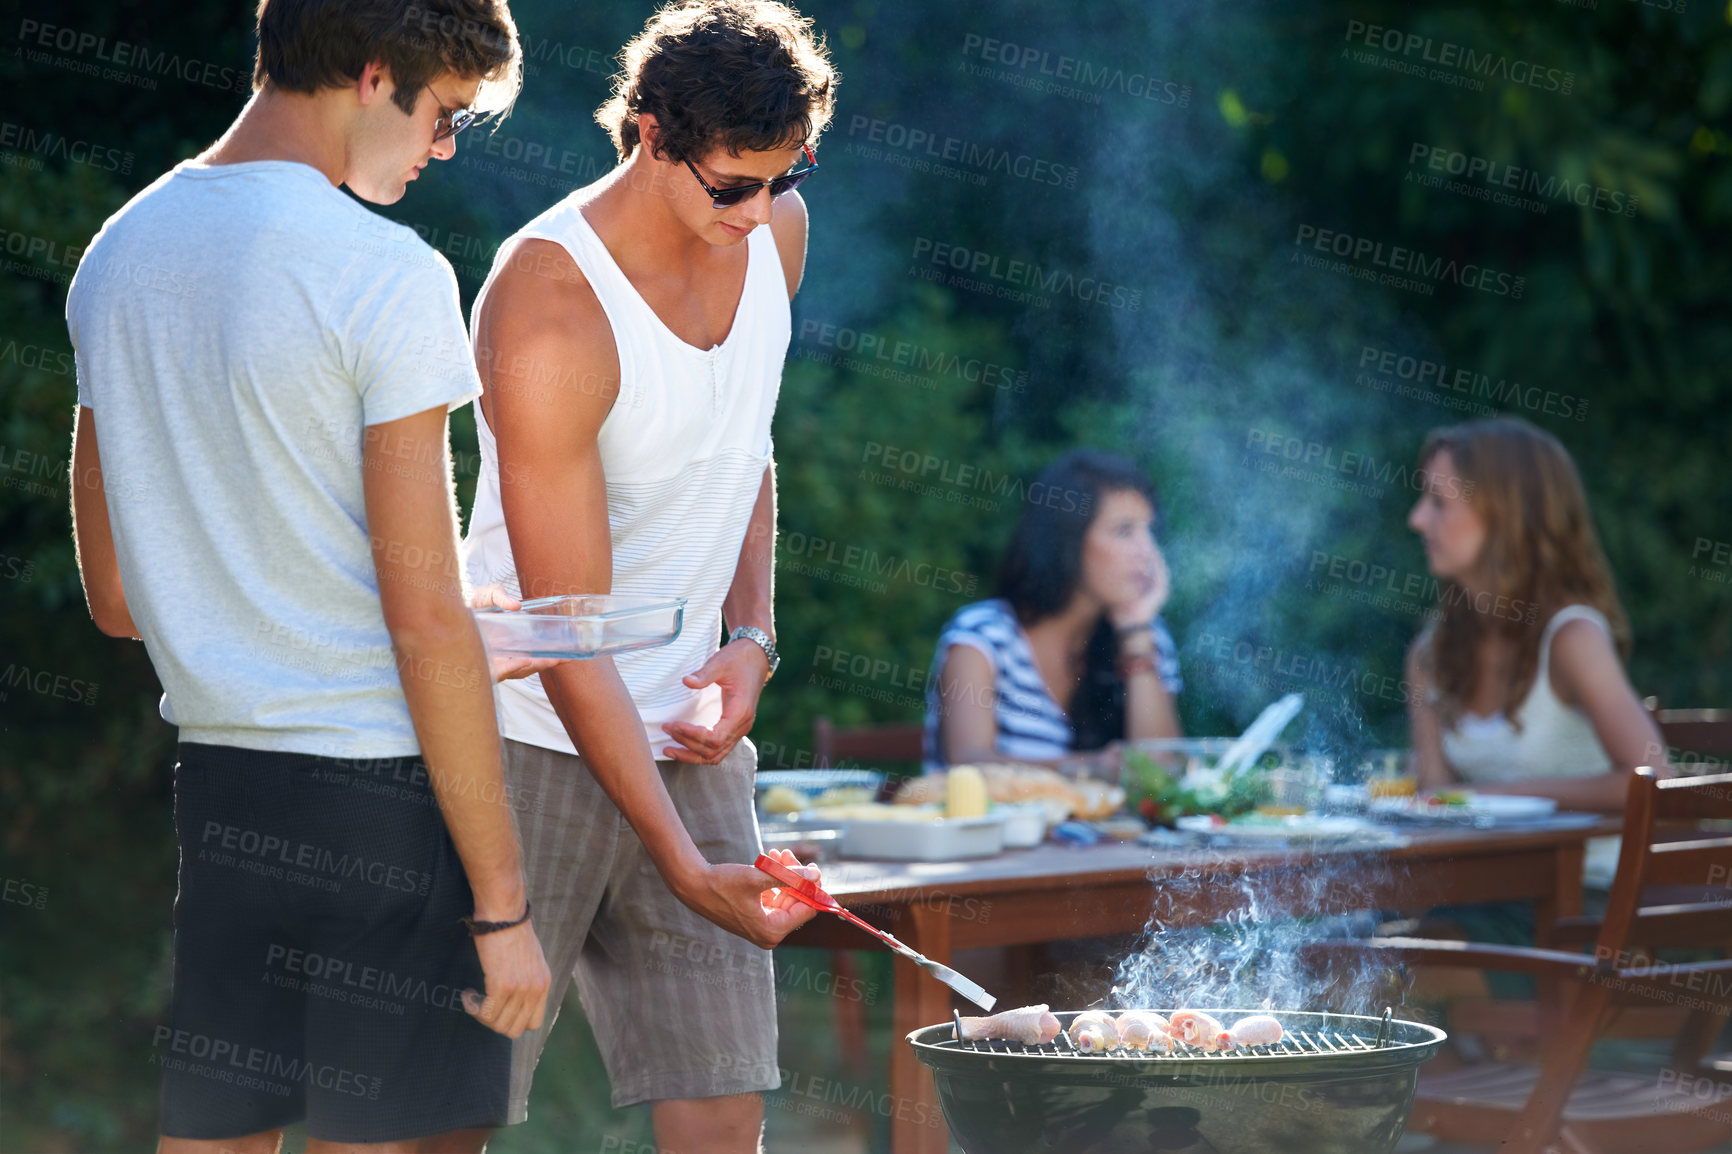 Buy stock photo Young guys barbequing meat on the grill outdoors - Lifestyle